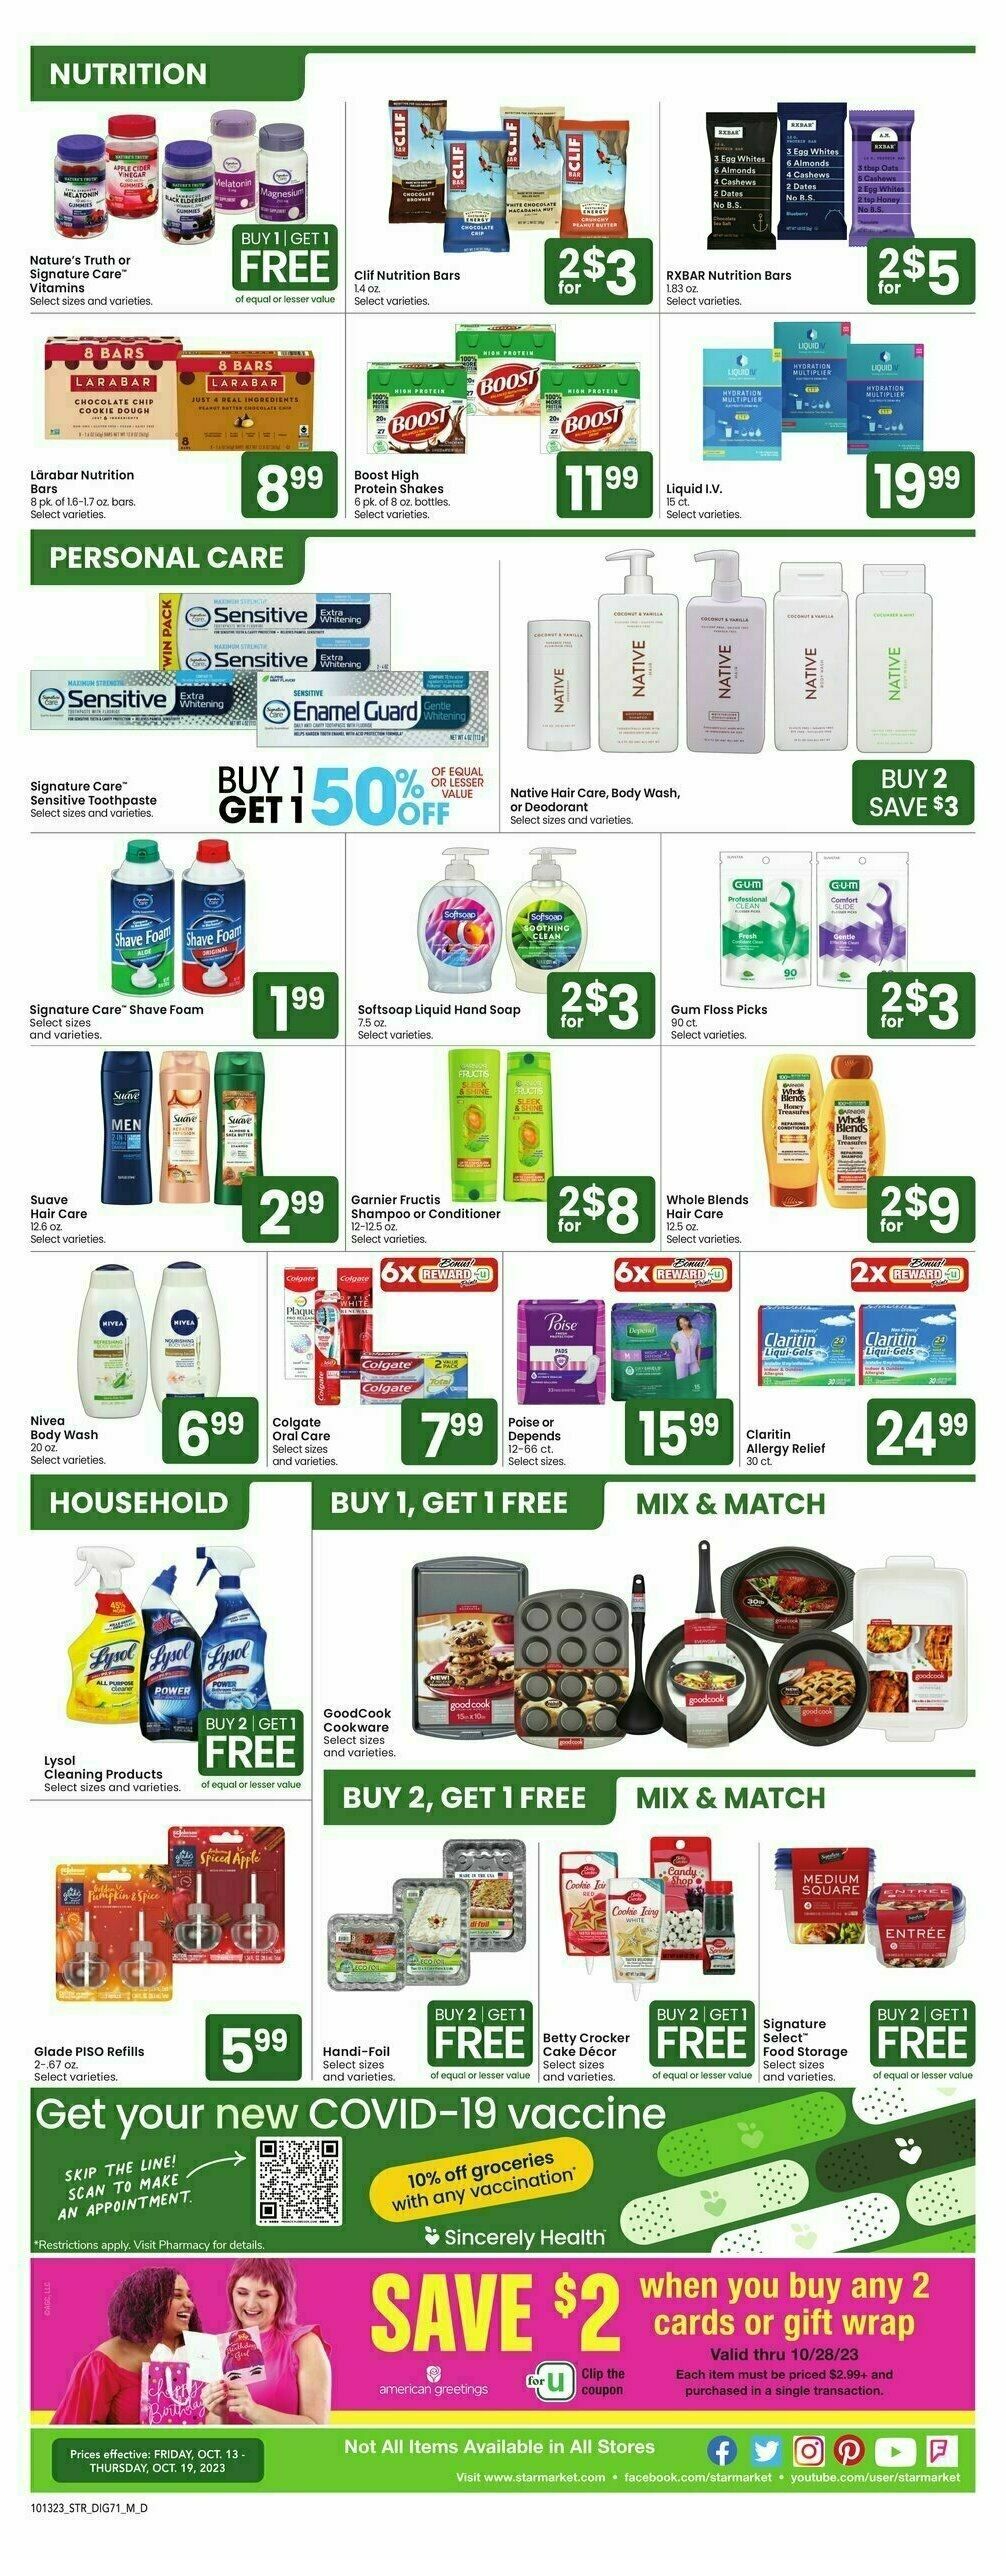 Star Market Additional Savings Weekly Ad from October 13